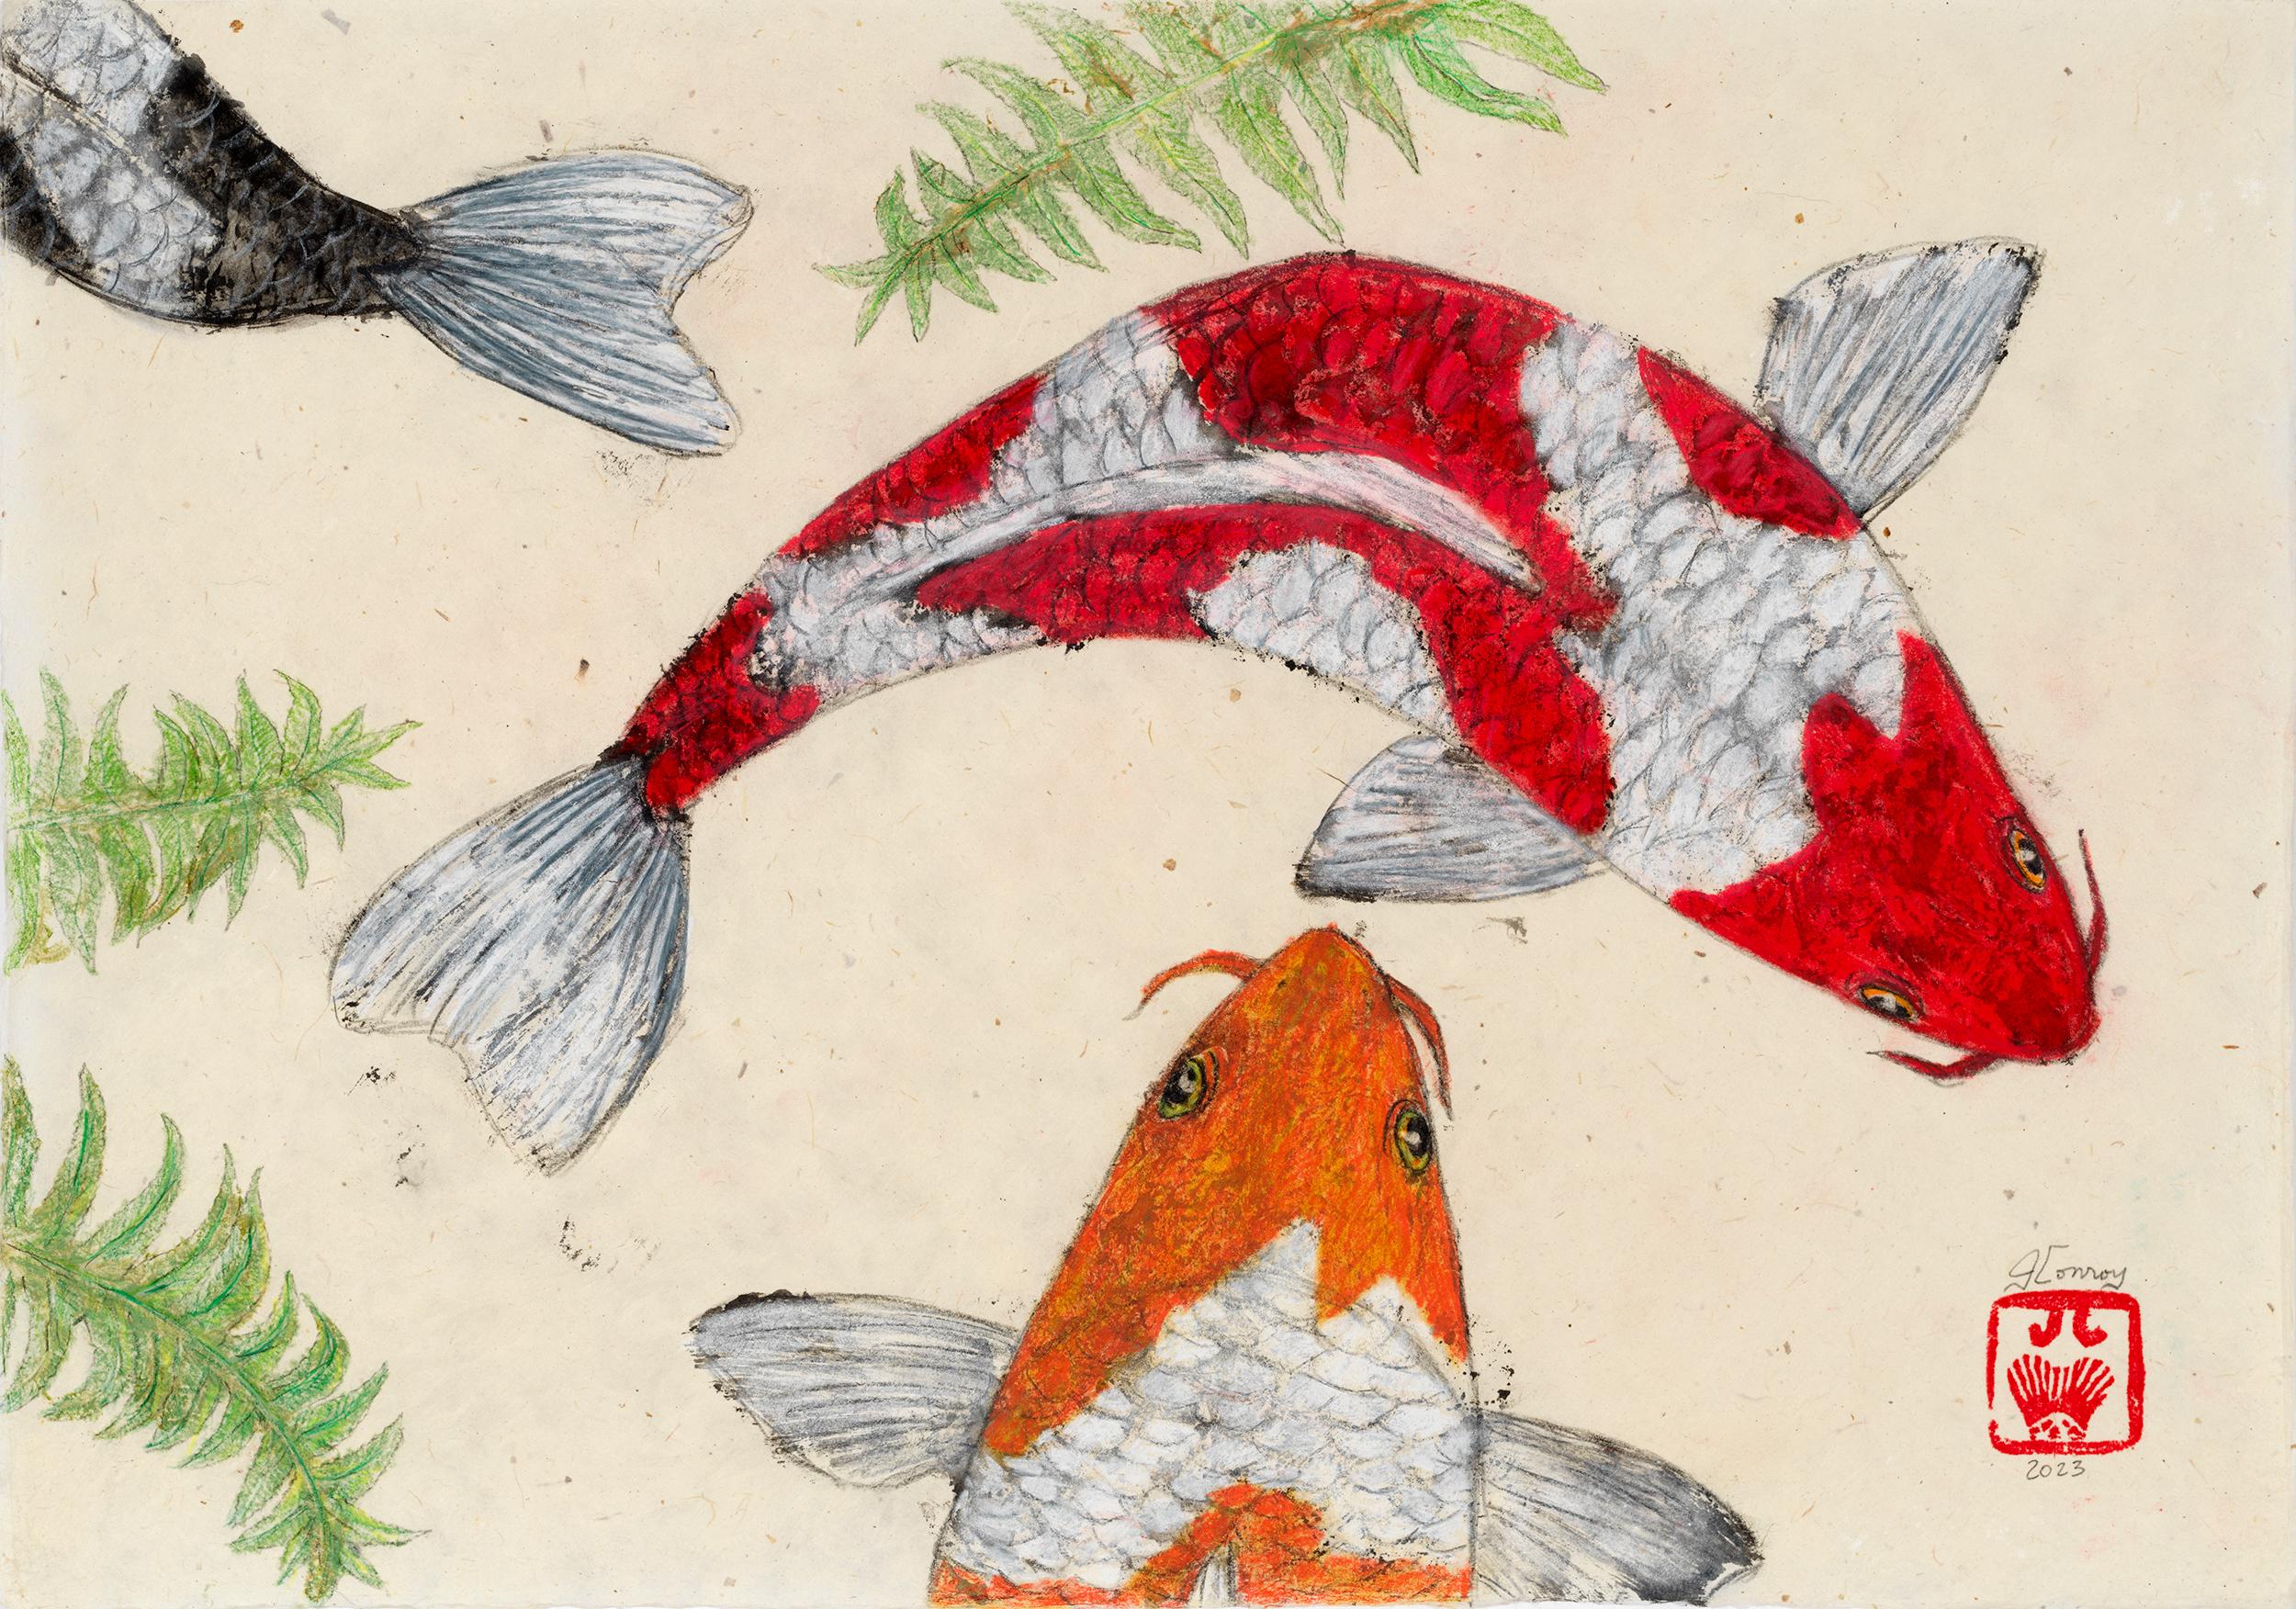 Jeff Conroy Animal Painting - Three's Company - Gyotaku Style Sumi Ink Painting of Multi-Colored Koi on Paper